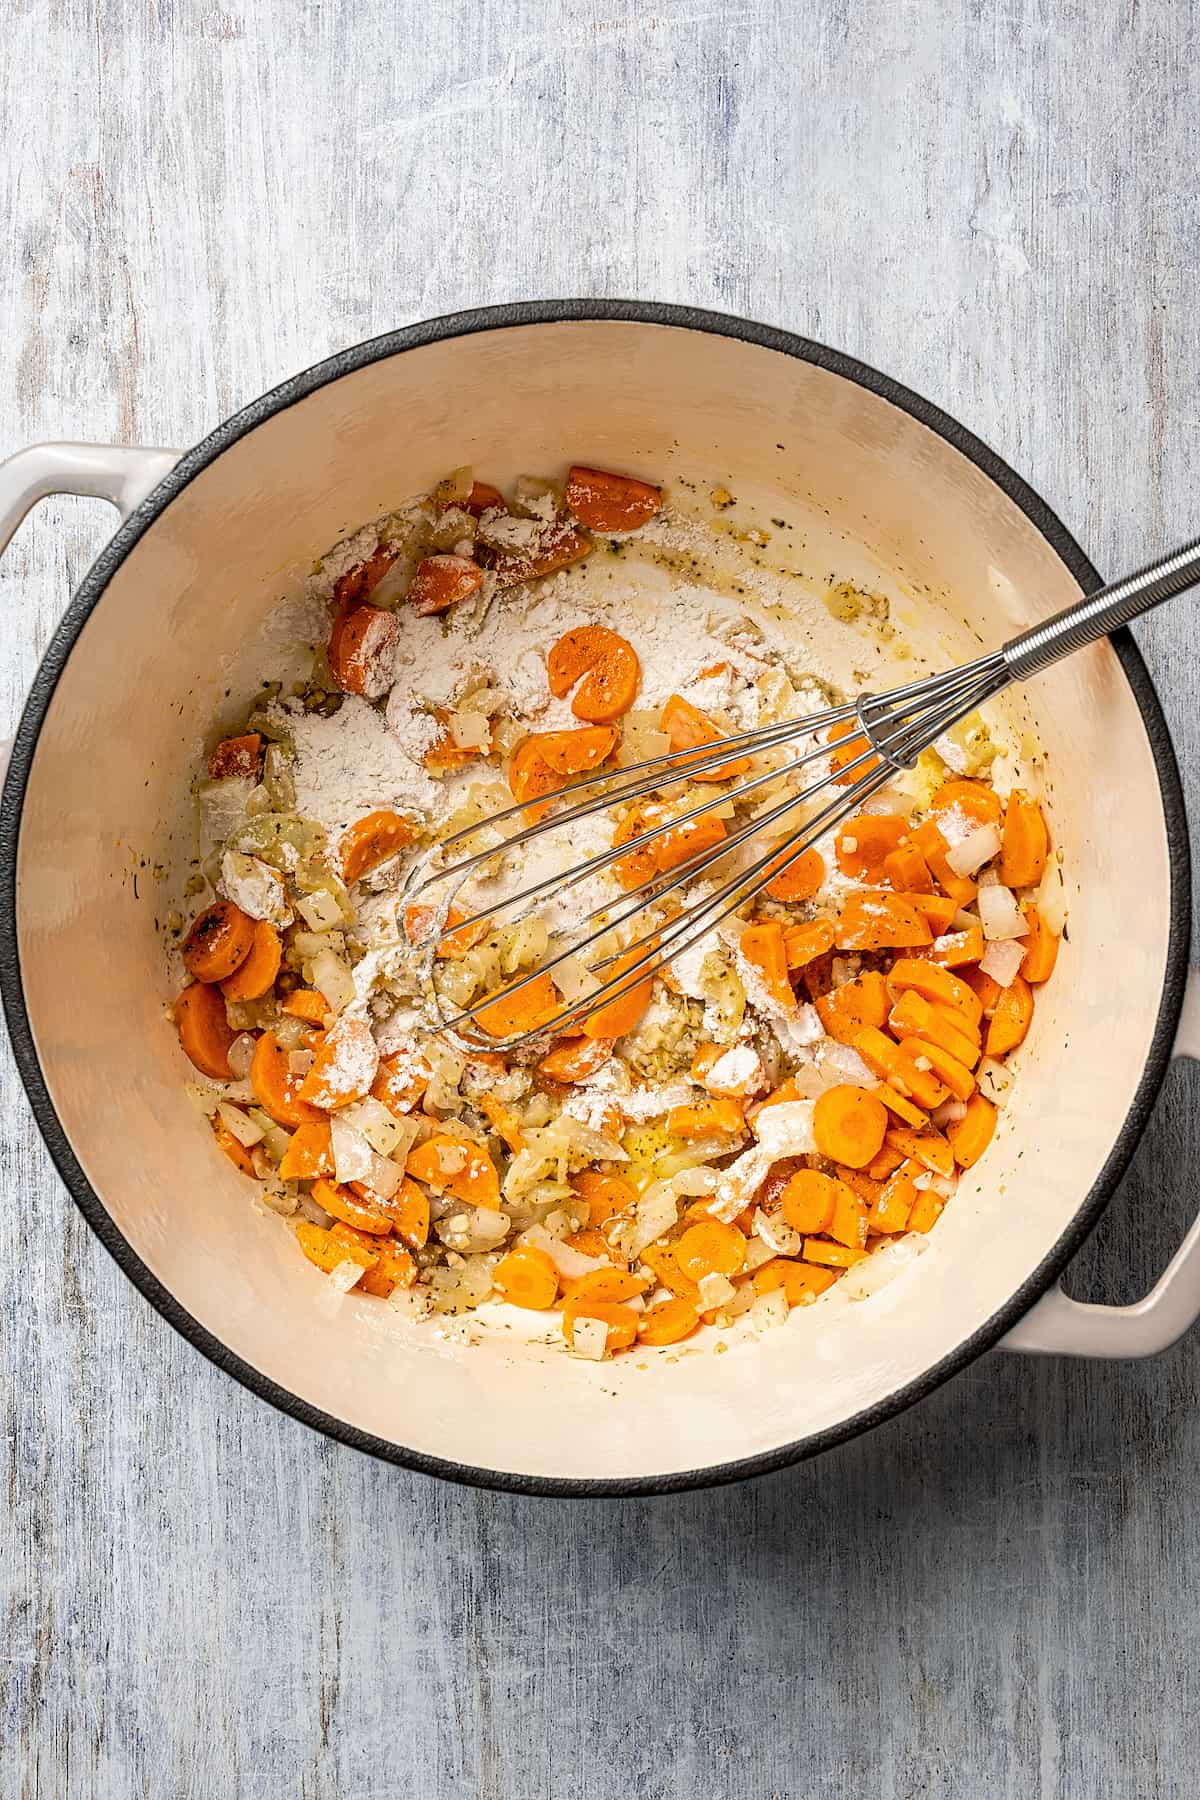 A roux made of flour and butter is whisked into sautéed onion, garlic, and carrots in a pot.